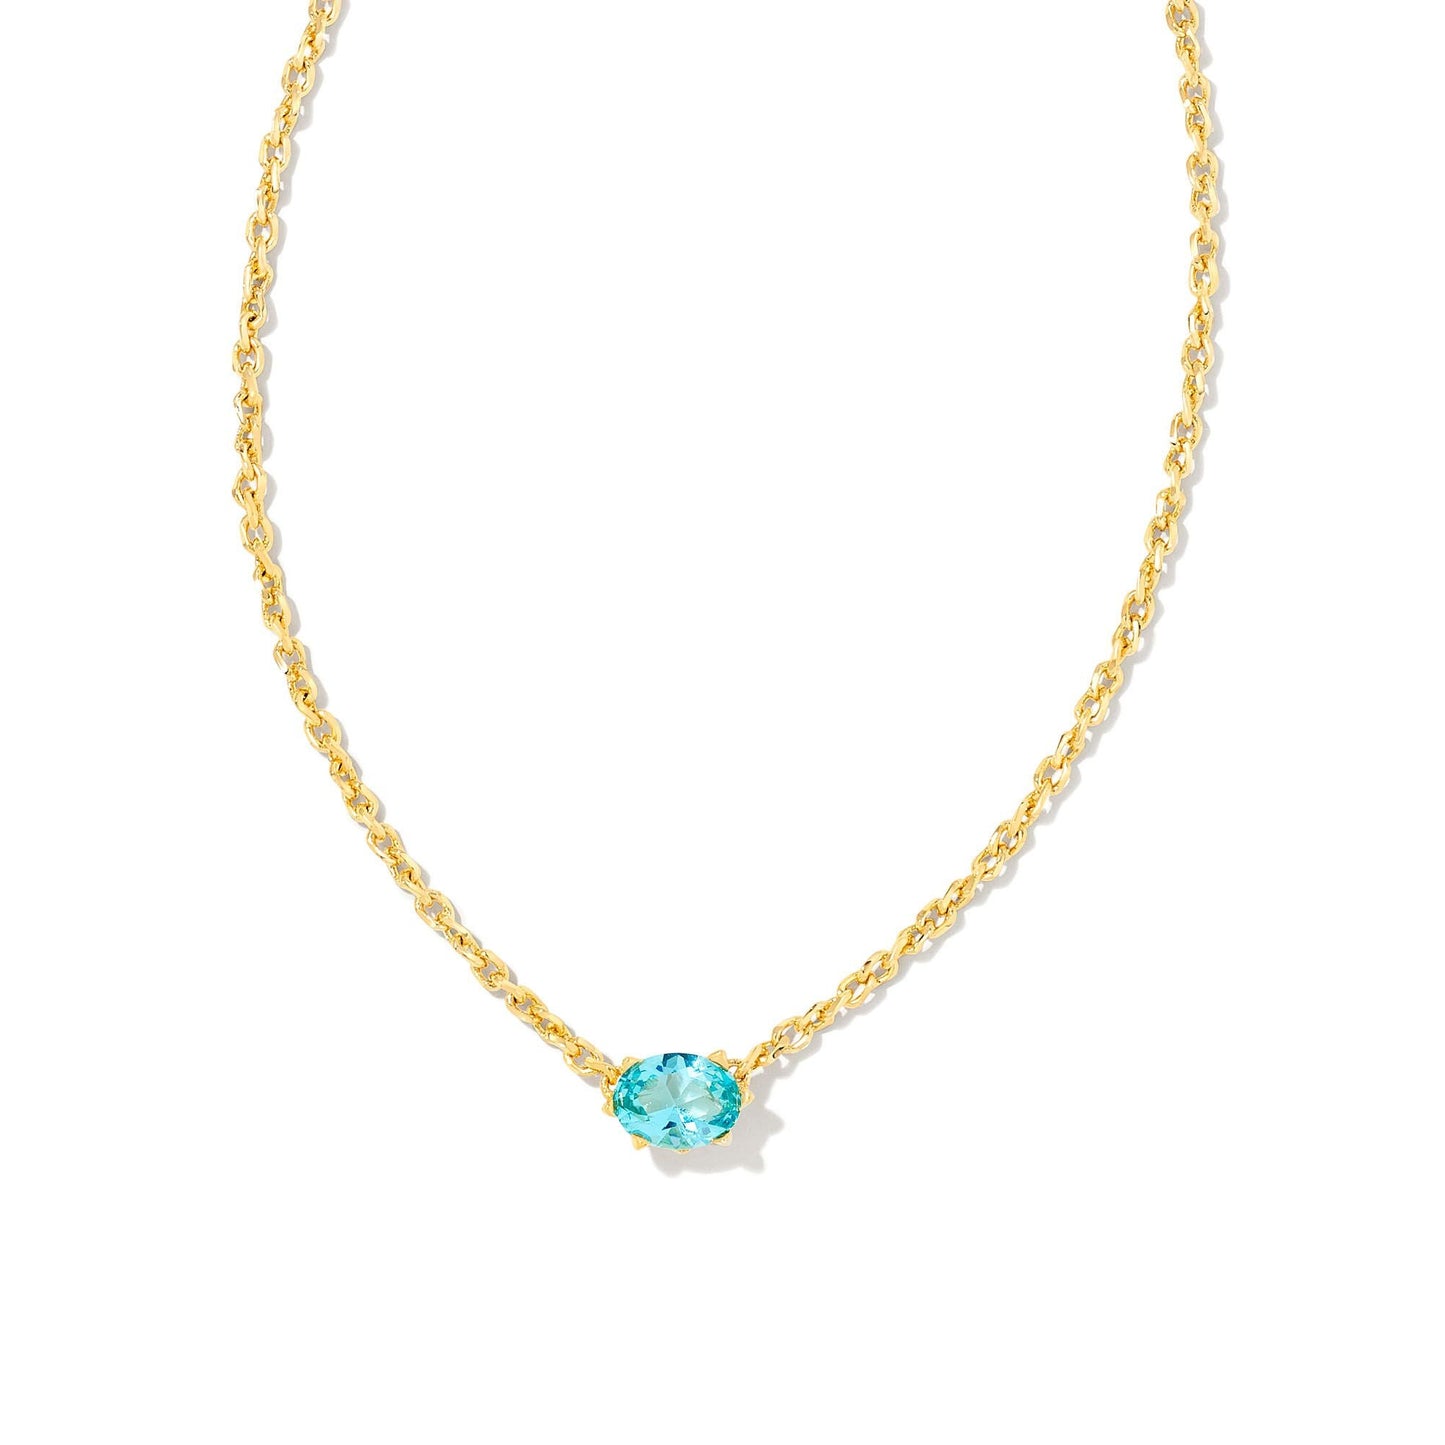 Cailin Crystal Necklace in Gold and Aqua Crystal